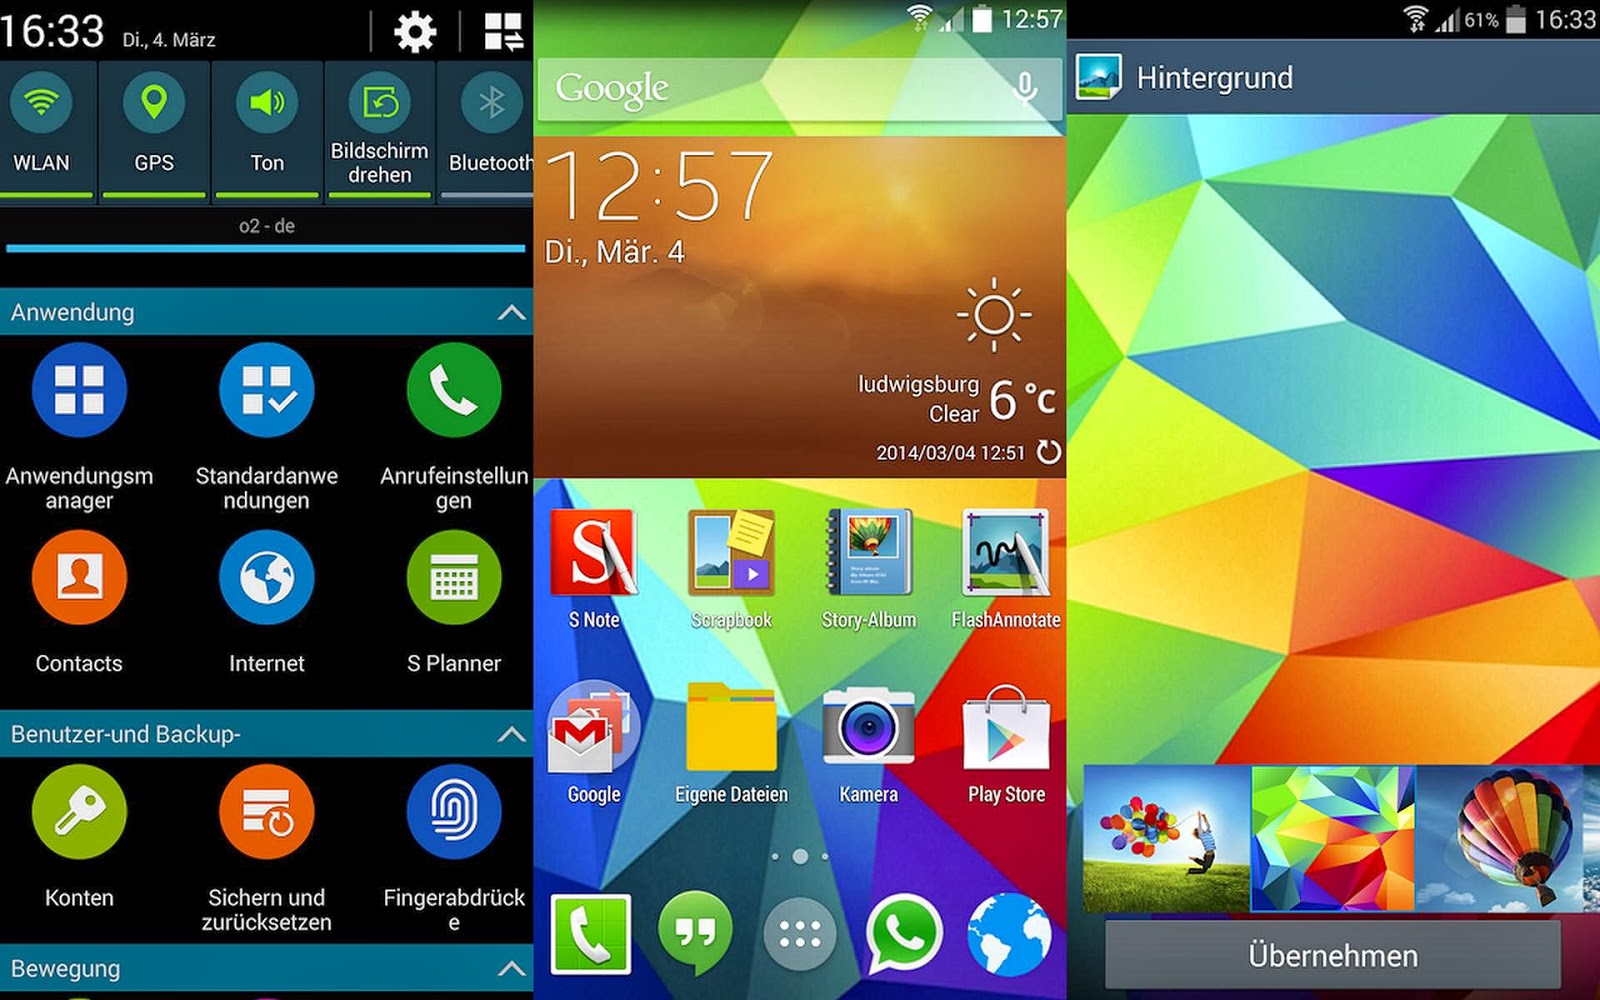 Samsung Galaxy s5 Android 4.4.2